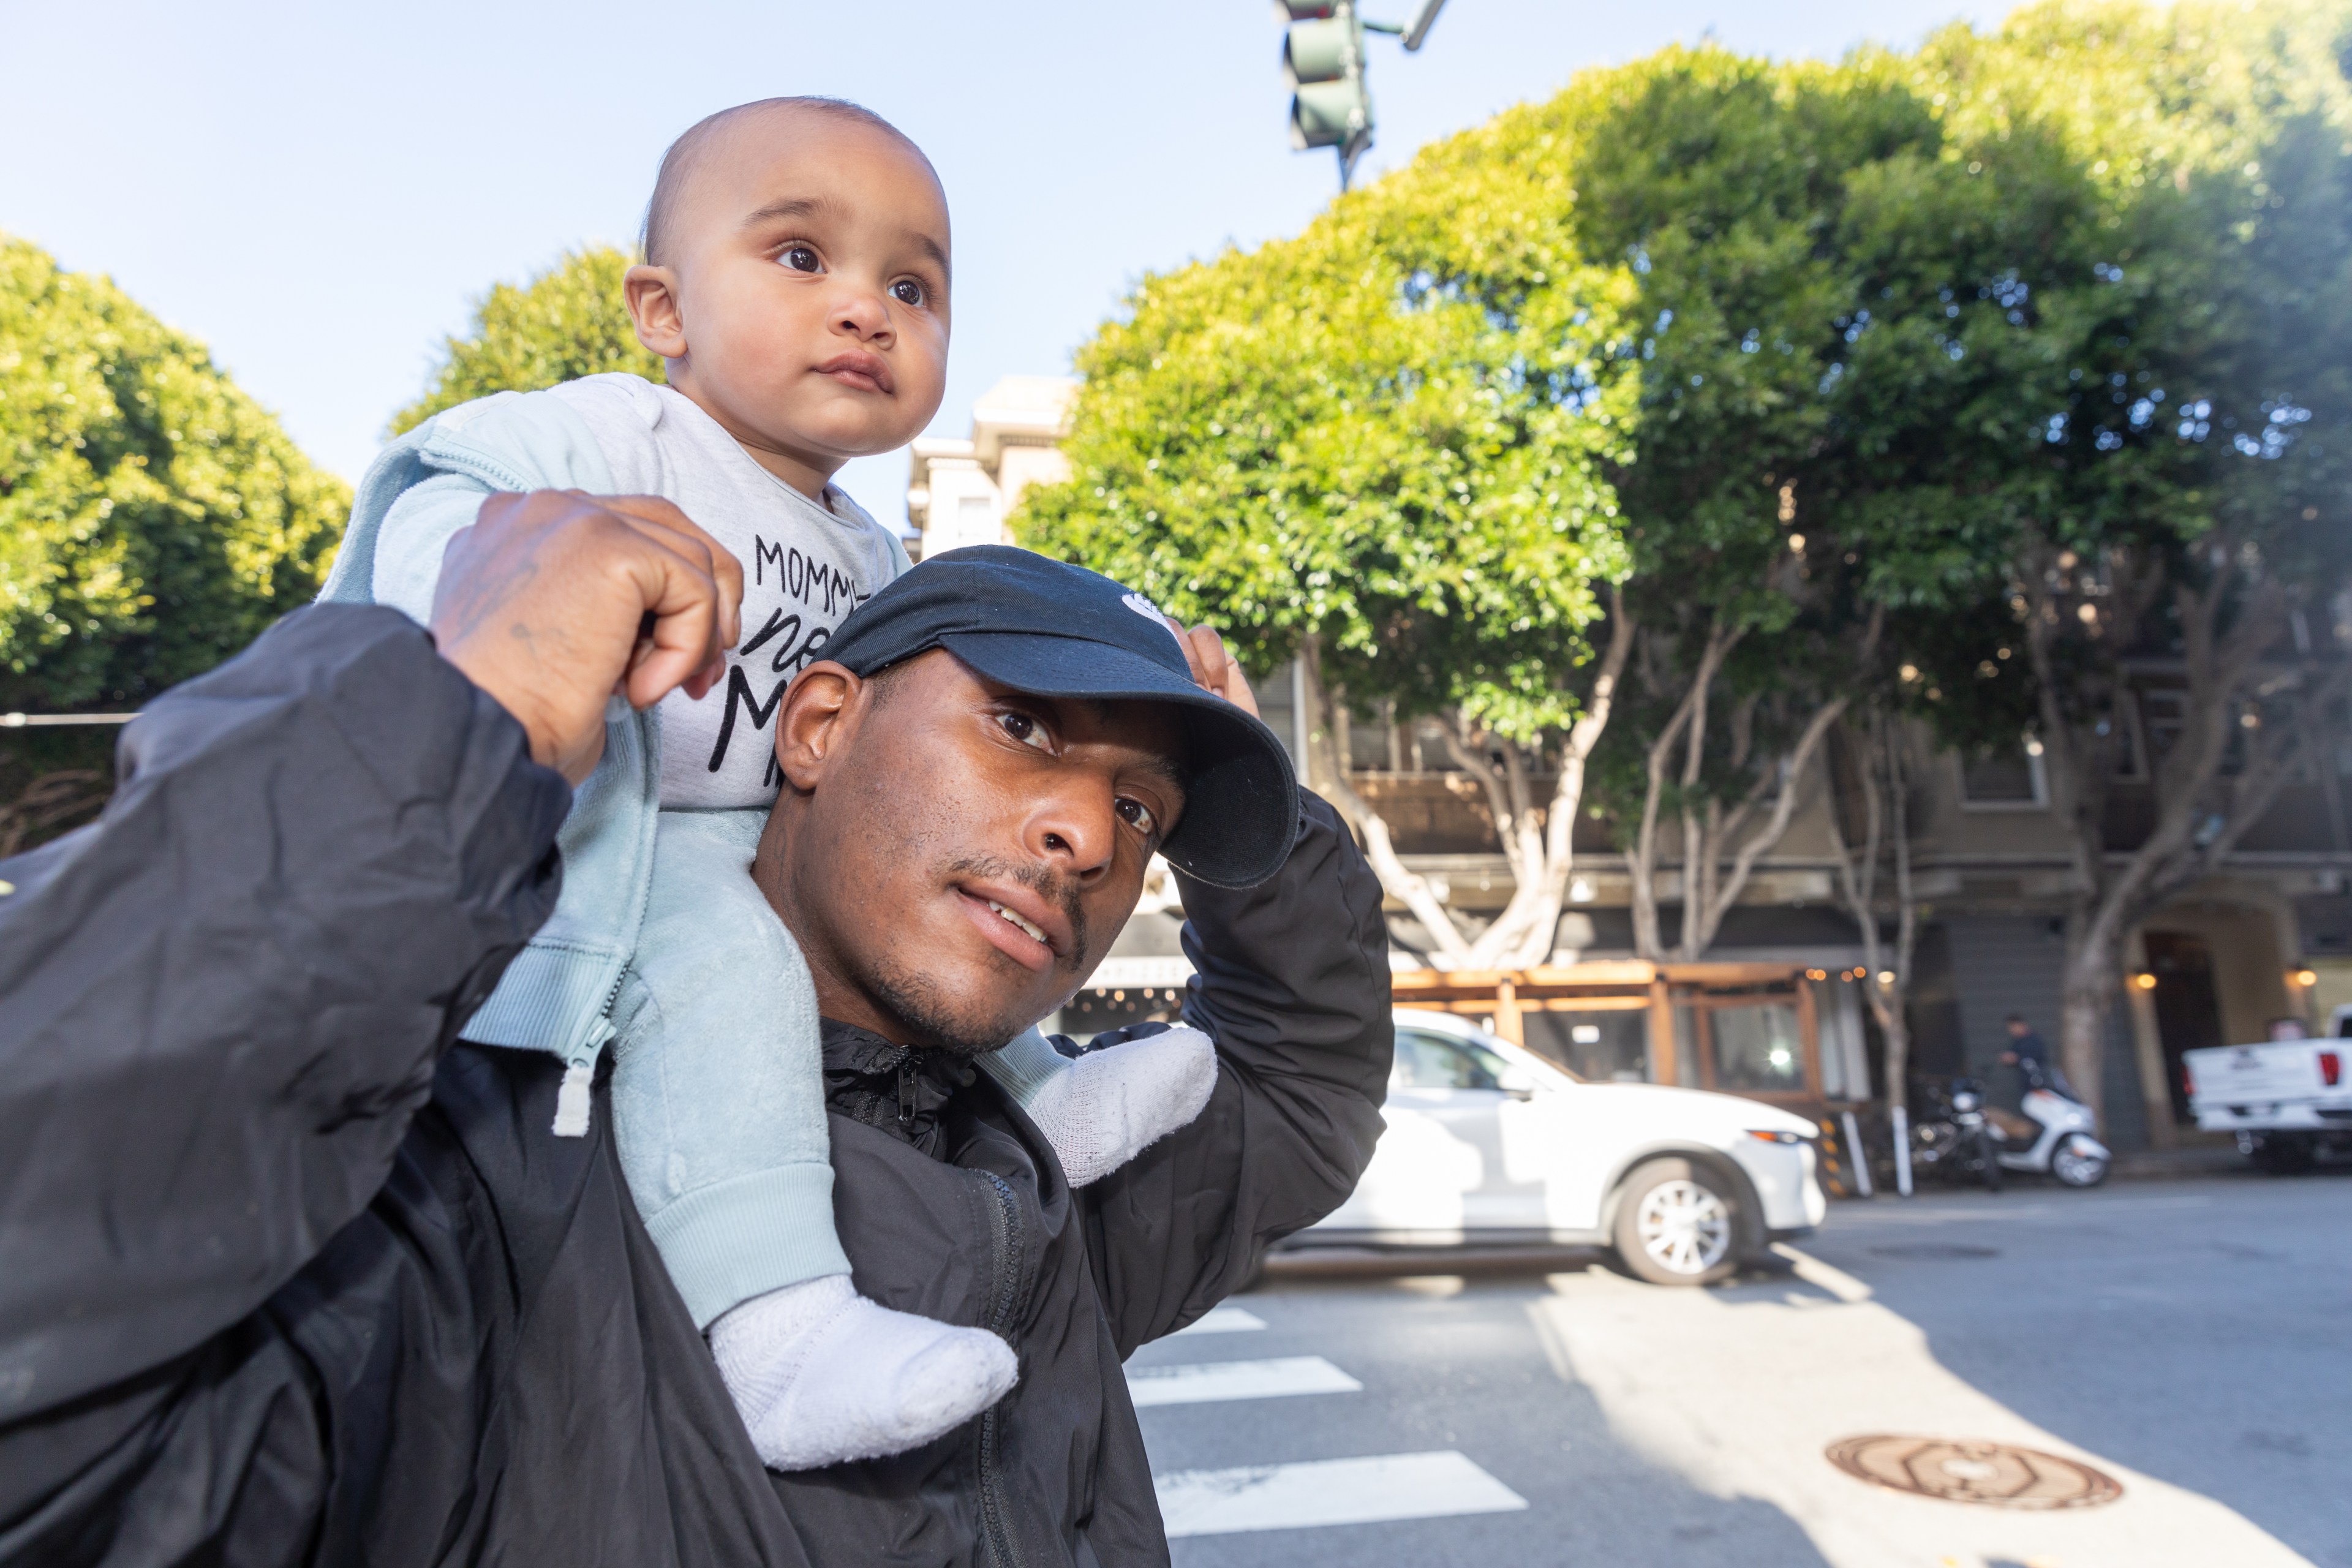 A man is carrying a baby on his shoulders while outdoors. They stand against a background of trees, vehicles, and a building. The baby wears a shirt that reads "Mommy's New Man."